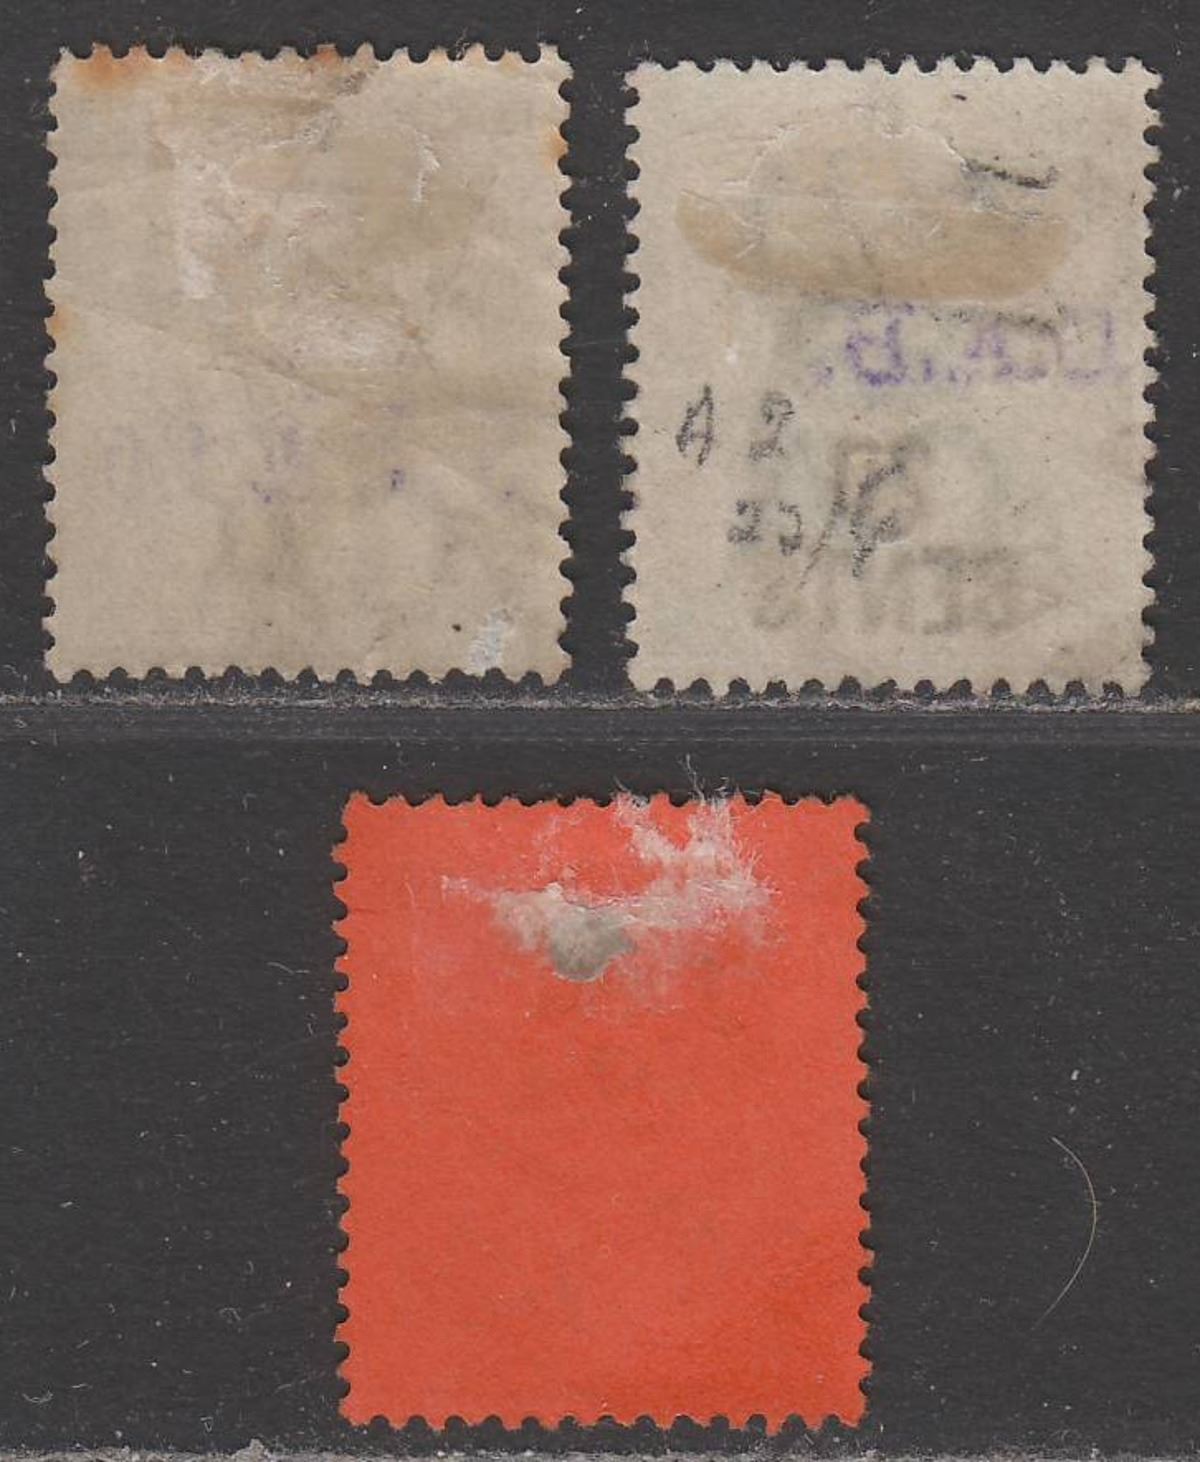 Hong Kong Queen Victoria Selection Used w DAB and ST & Co Company Chops